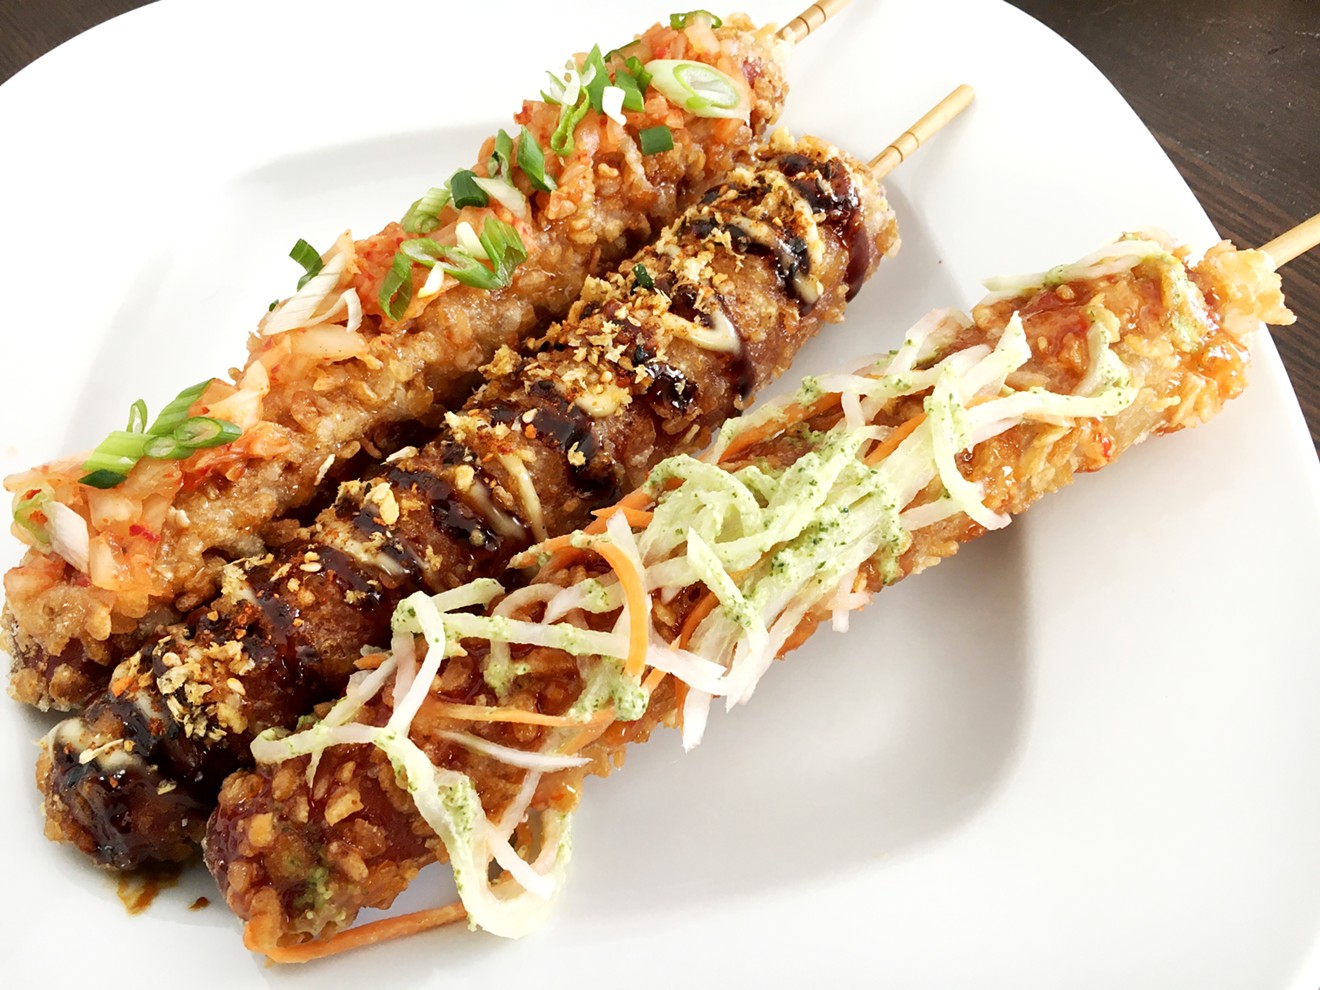 The rice crunch dogs at Mama's Noodle Cafe come in three styles: Seoul, Tokyo and Saigon.